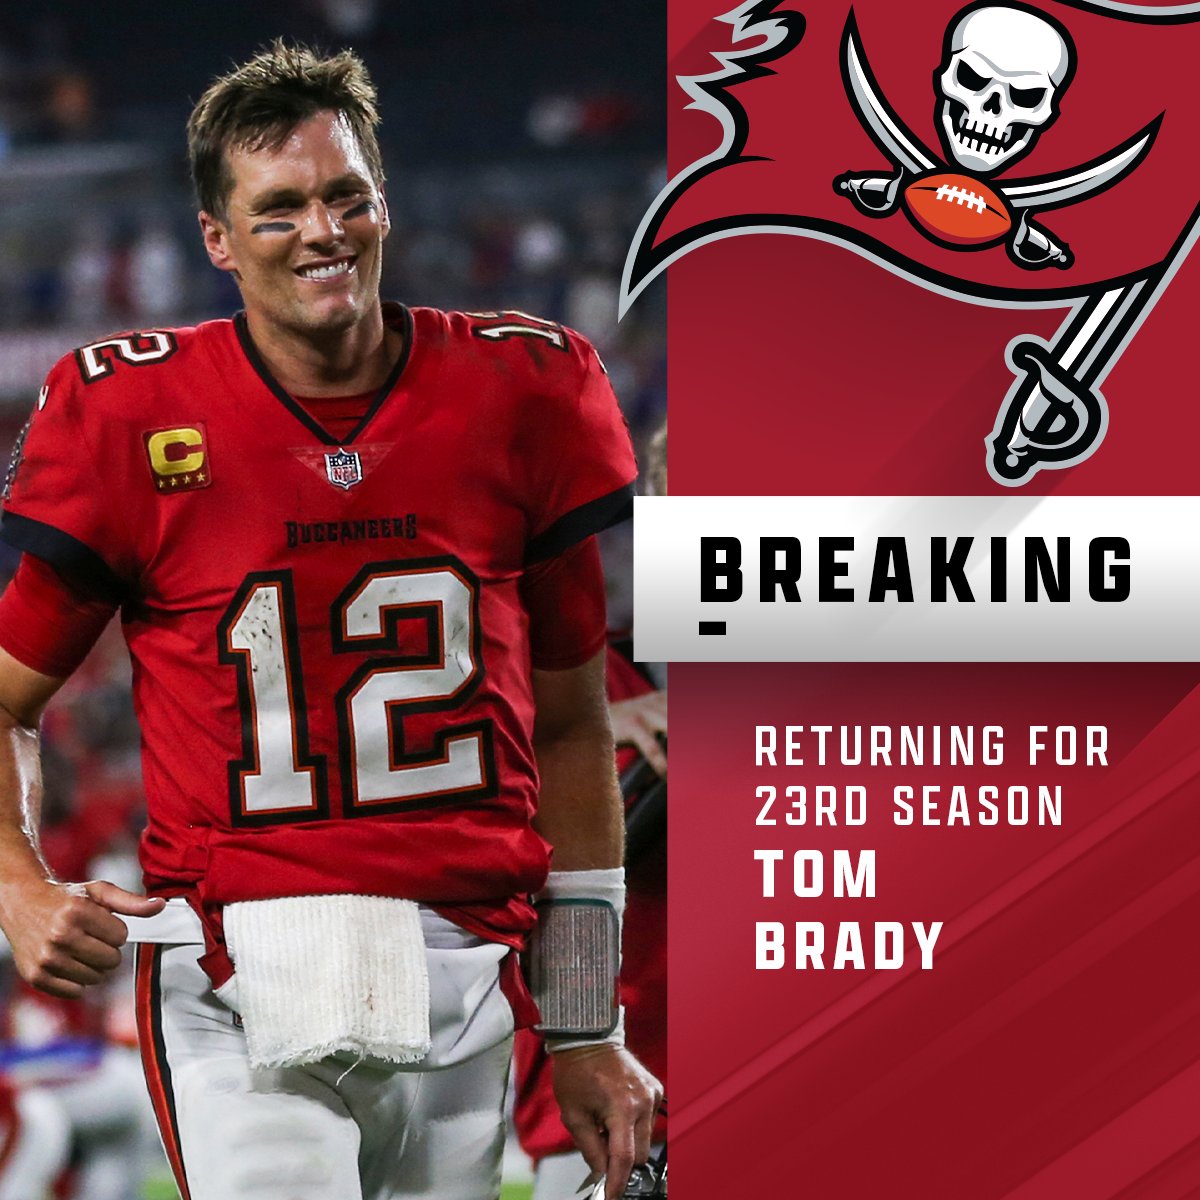 Tom Brady is returning to Tampa to play 23rd season in NFL